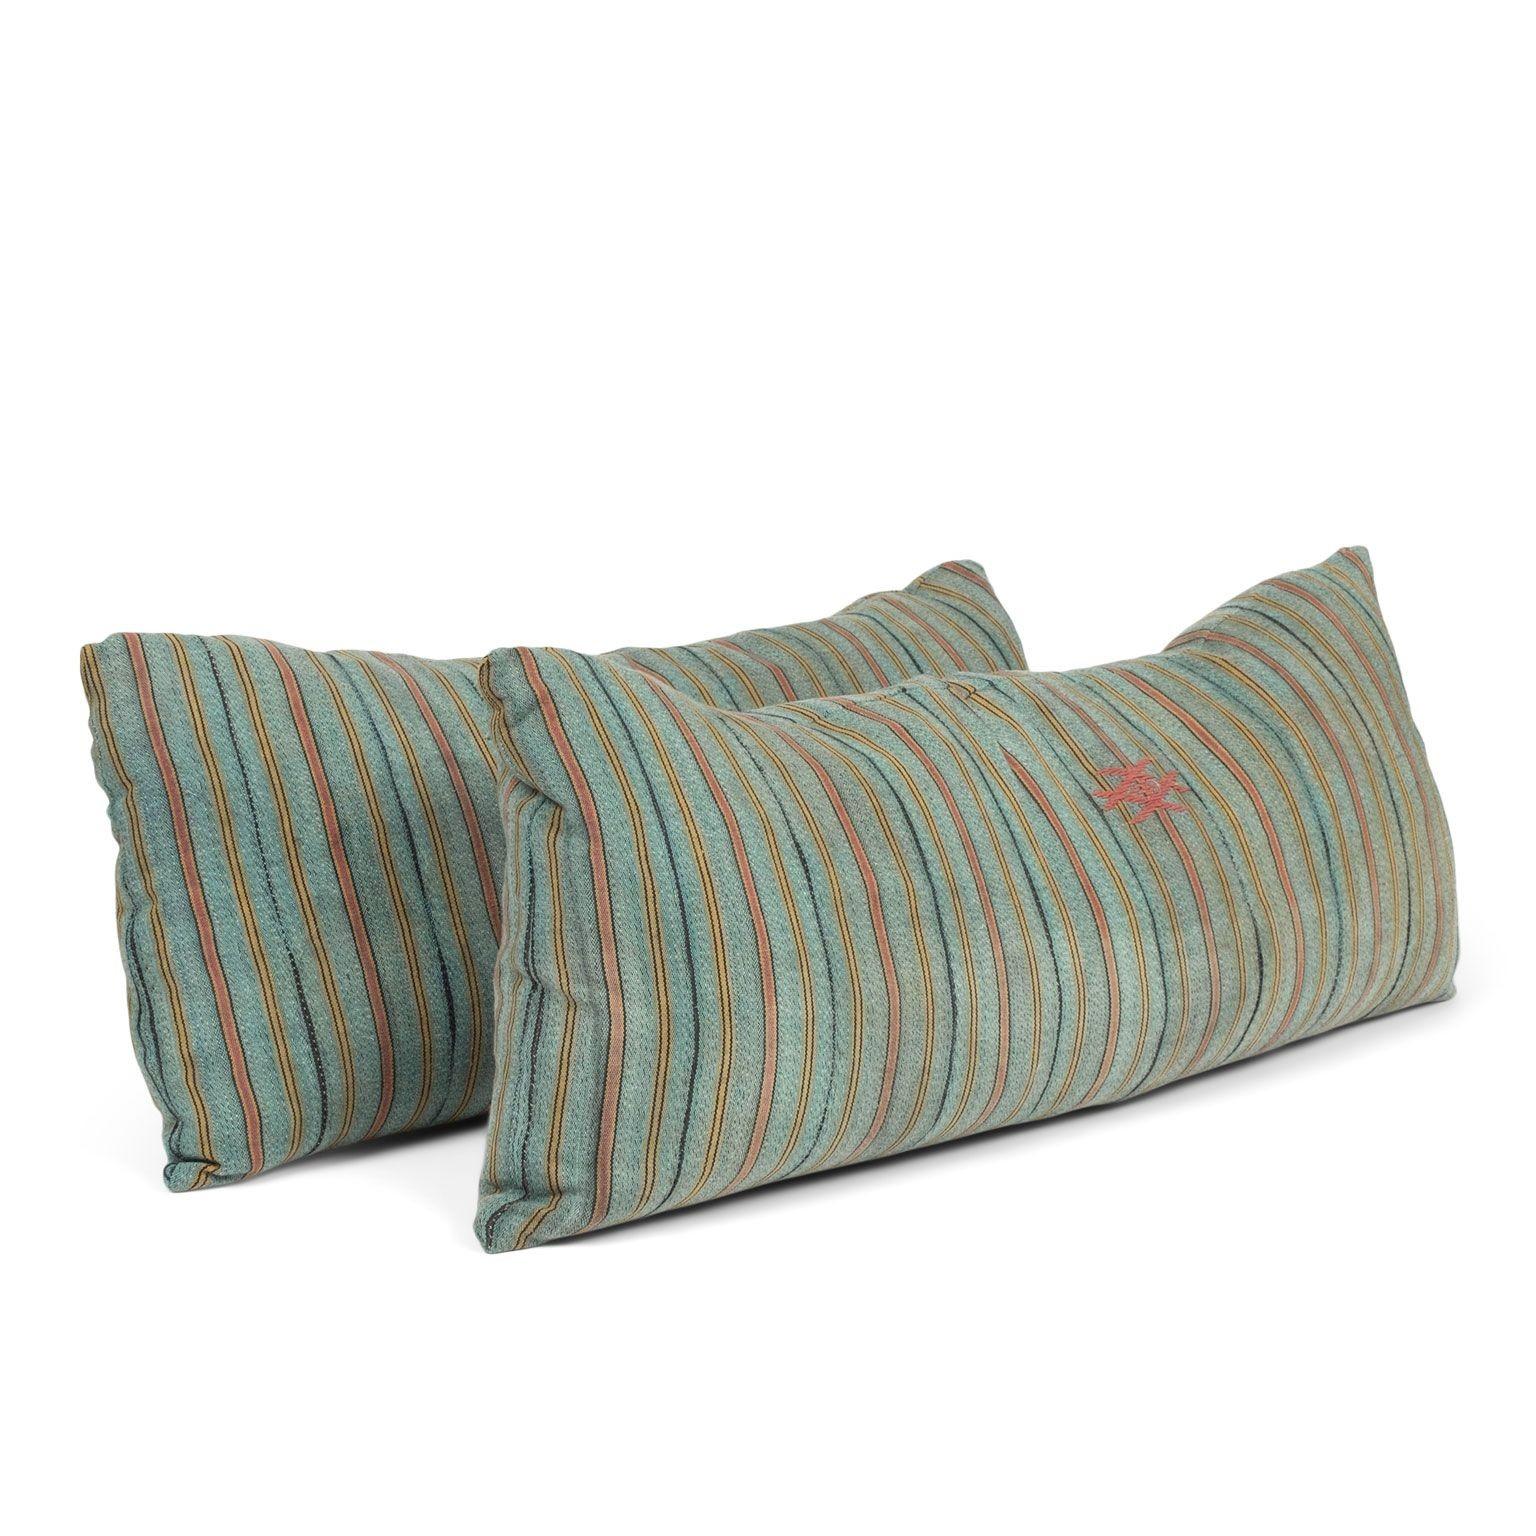 Hand-Woven Large Teal, Gold, Navy and Coral Striped Print Lumbar Cushion For Sale